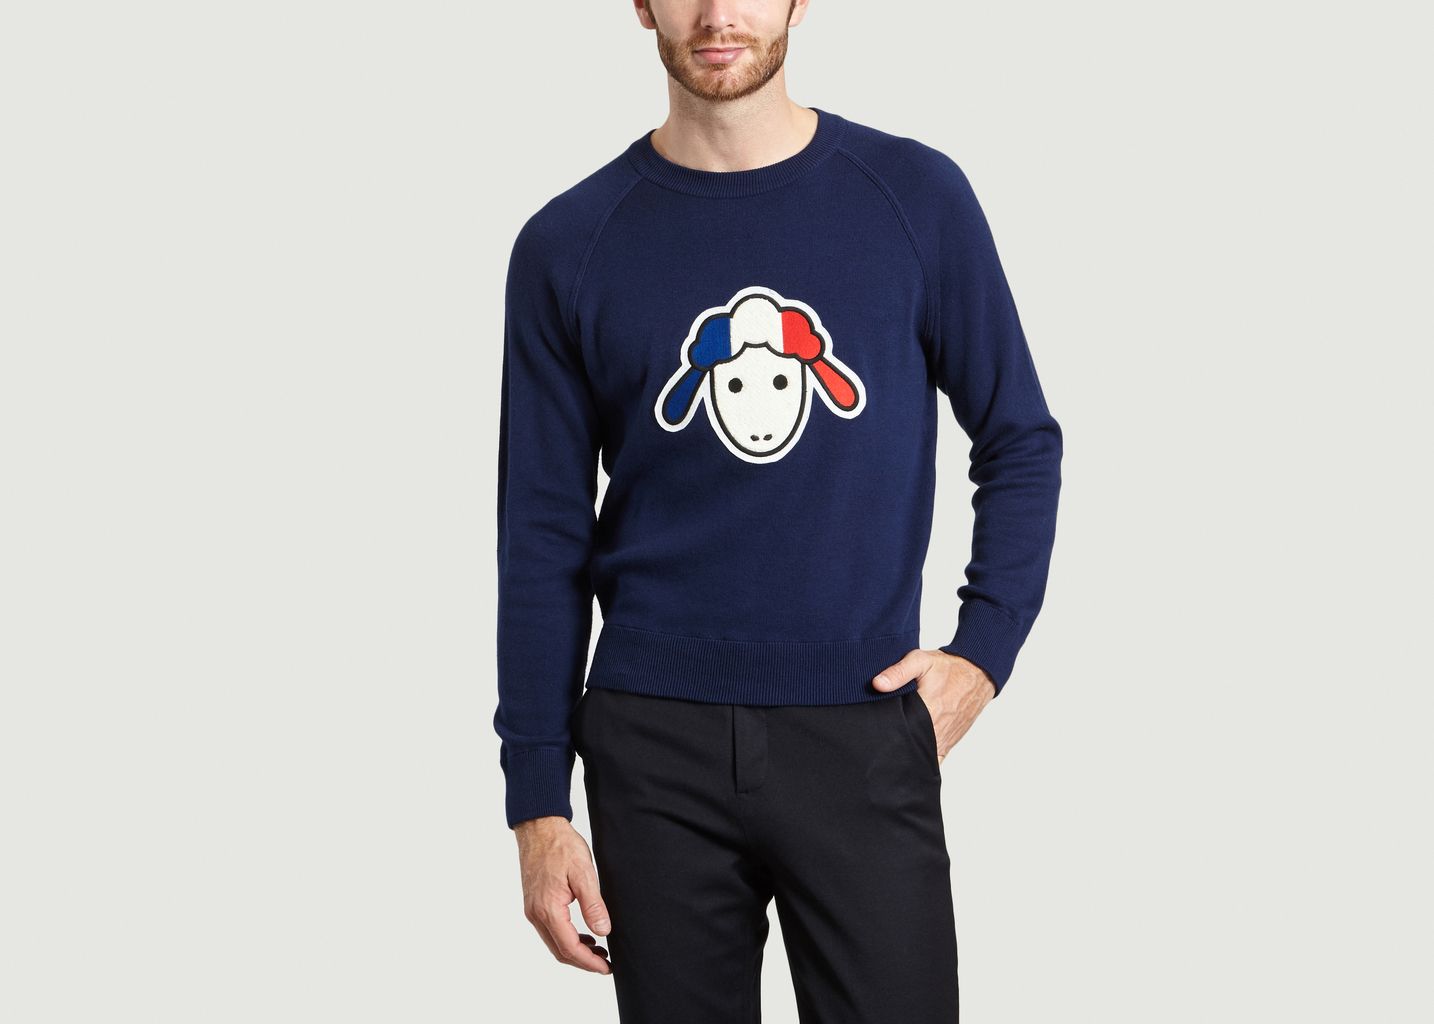 Embroidered Sheep Sweatshirt - Le Mont St Michel